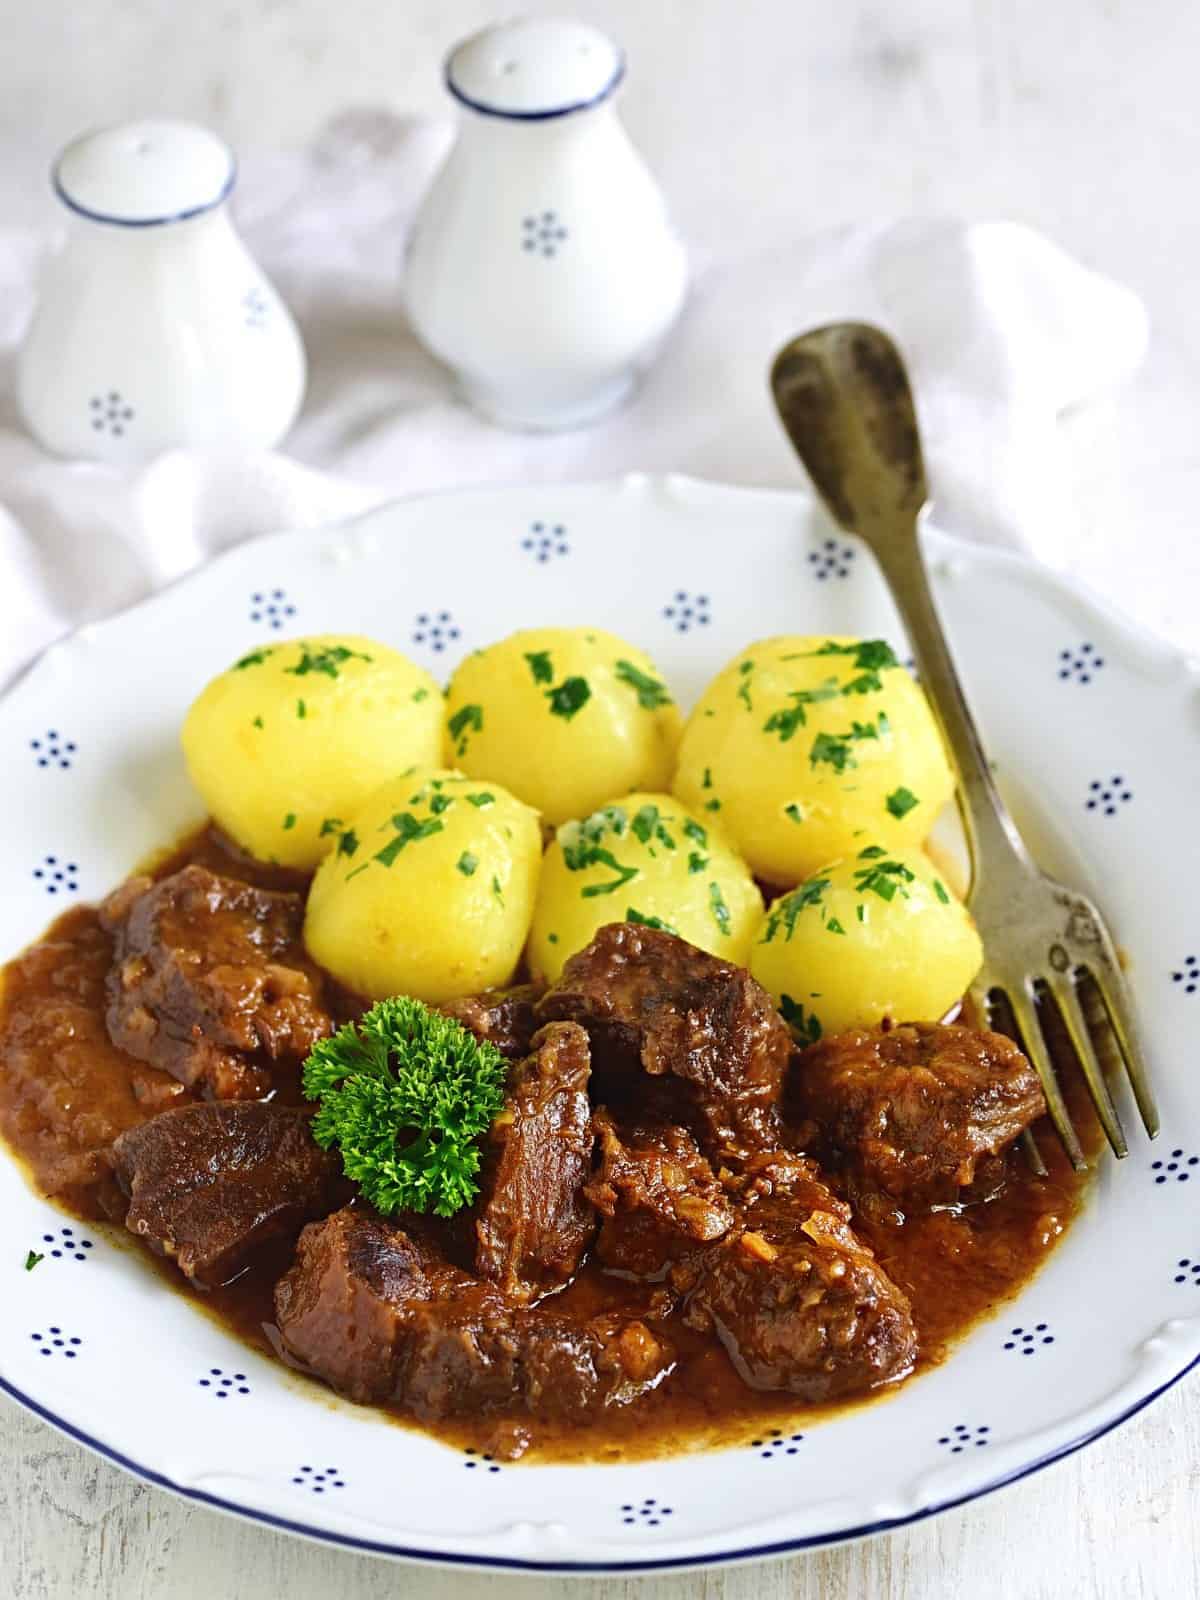 Austrian Goulash with Potatoes serven on a plate.